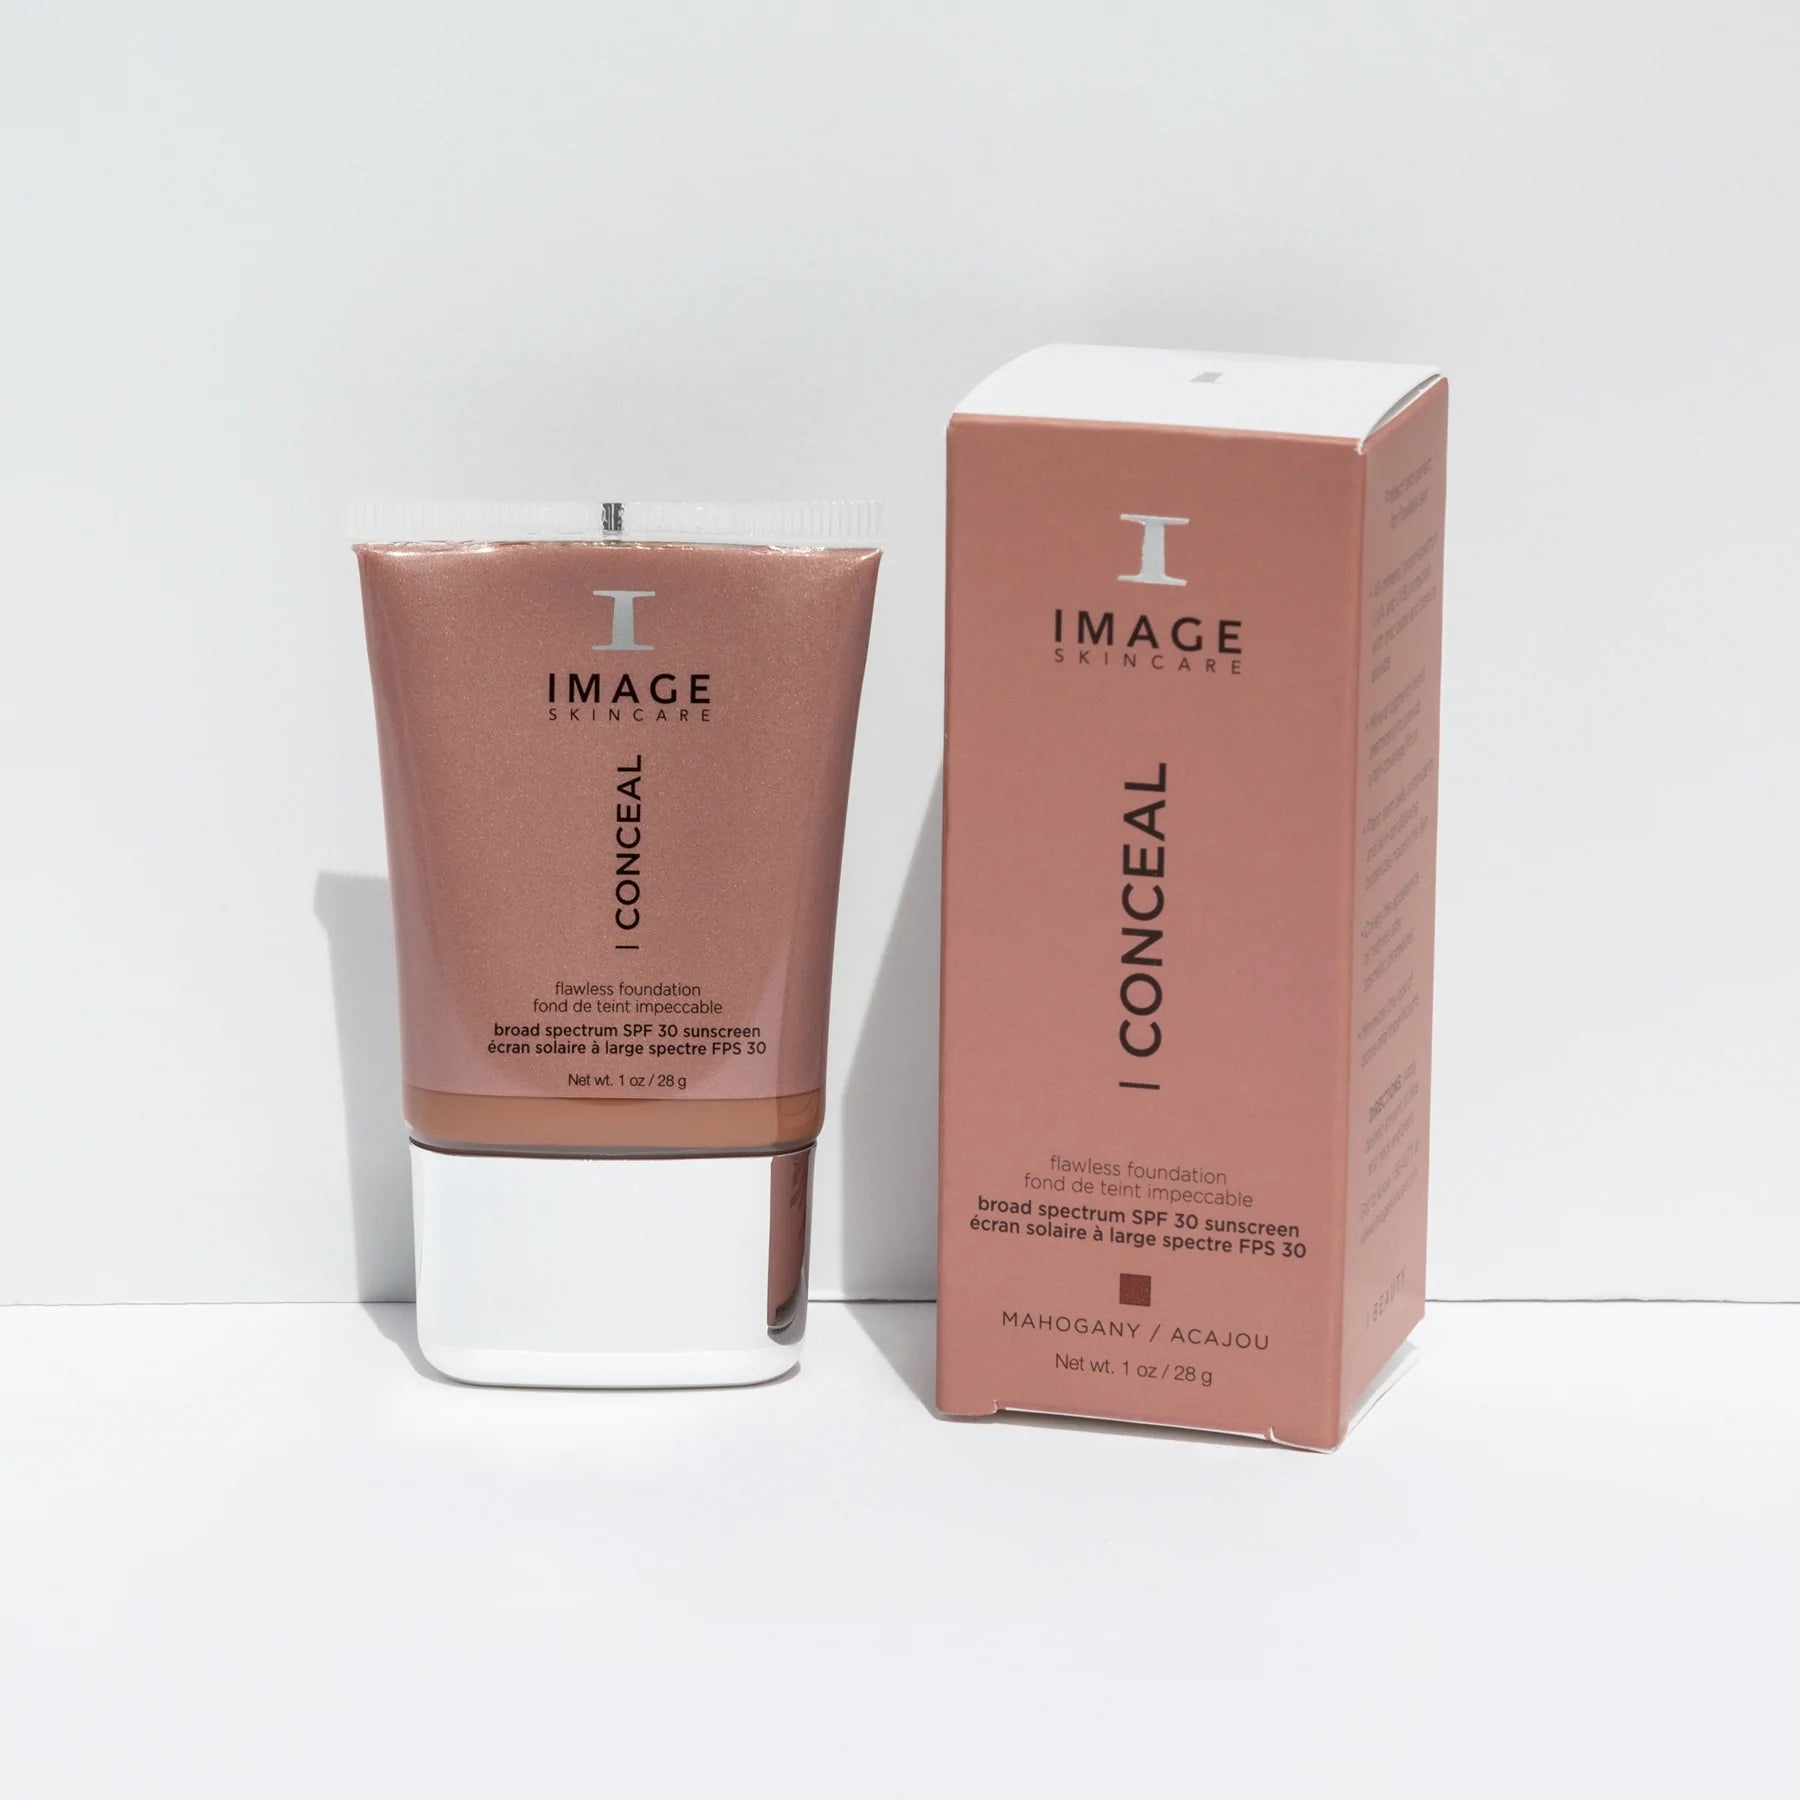 I CONCEAL flawless foundation broad-spectrum SPF 30 mahogany